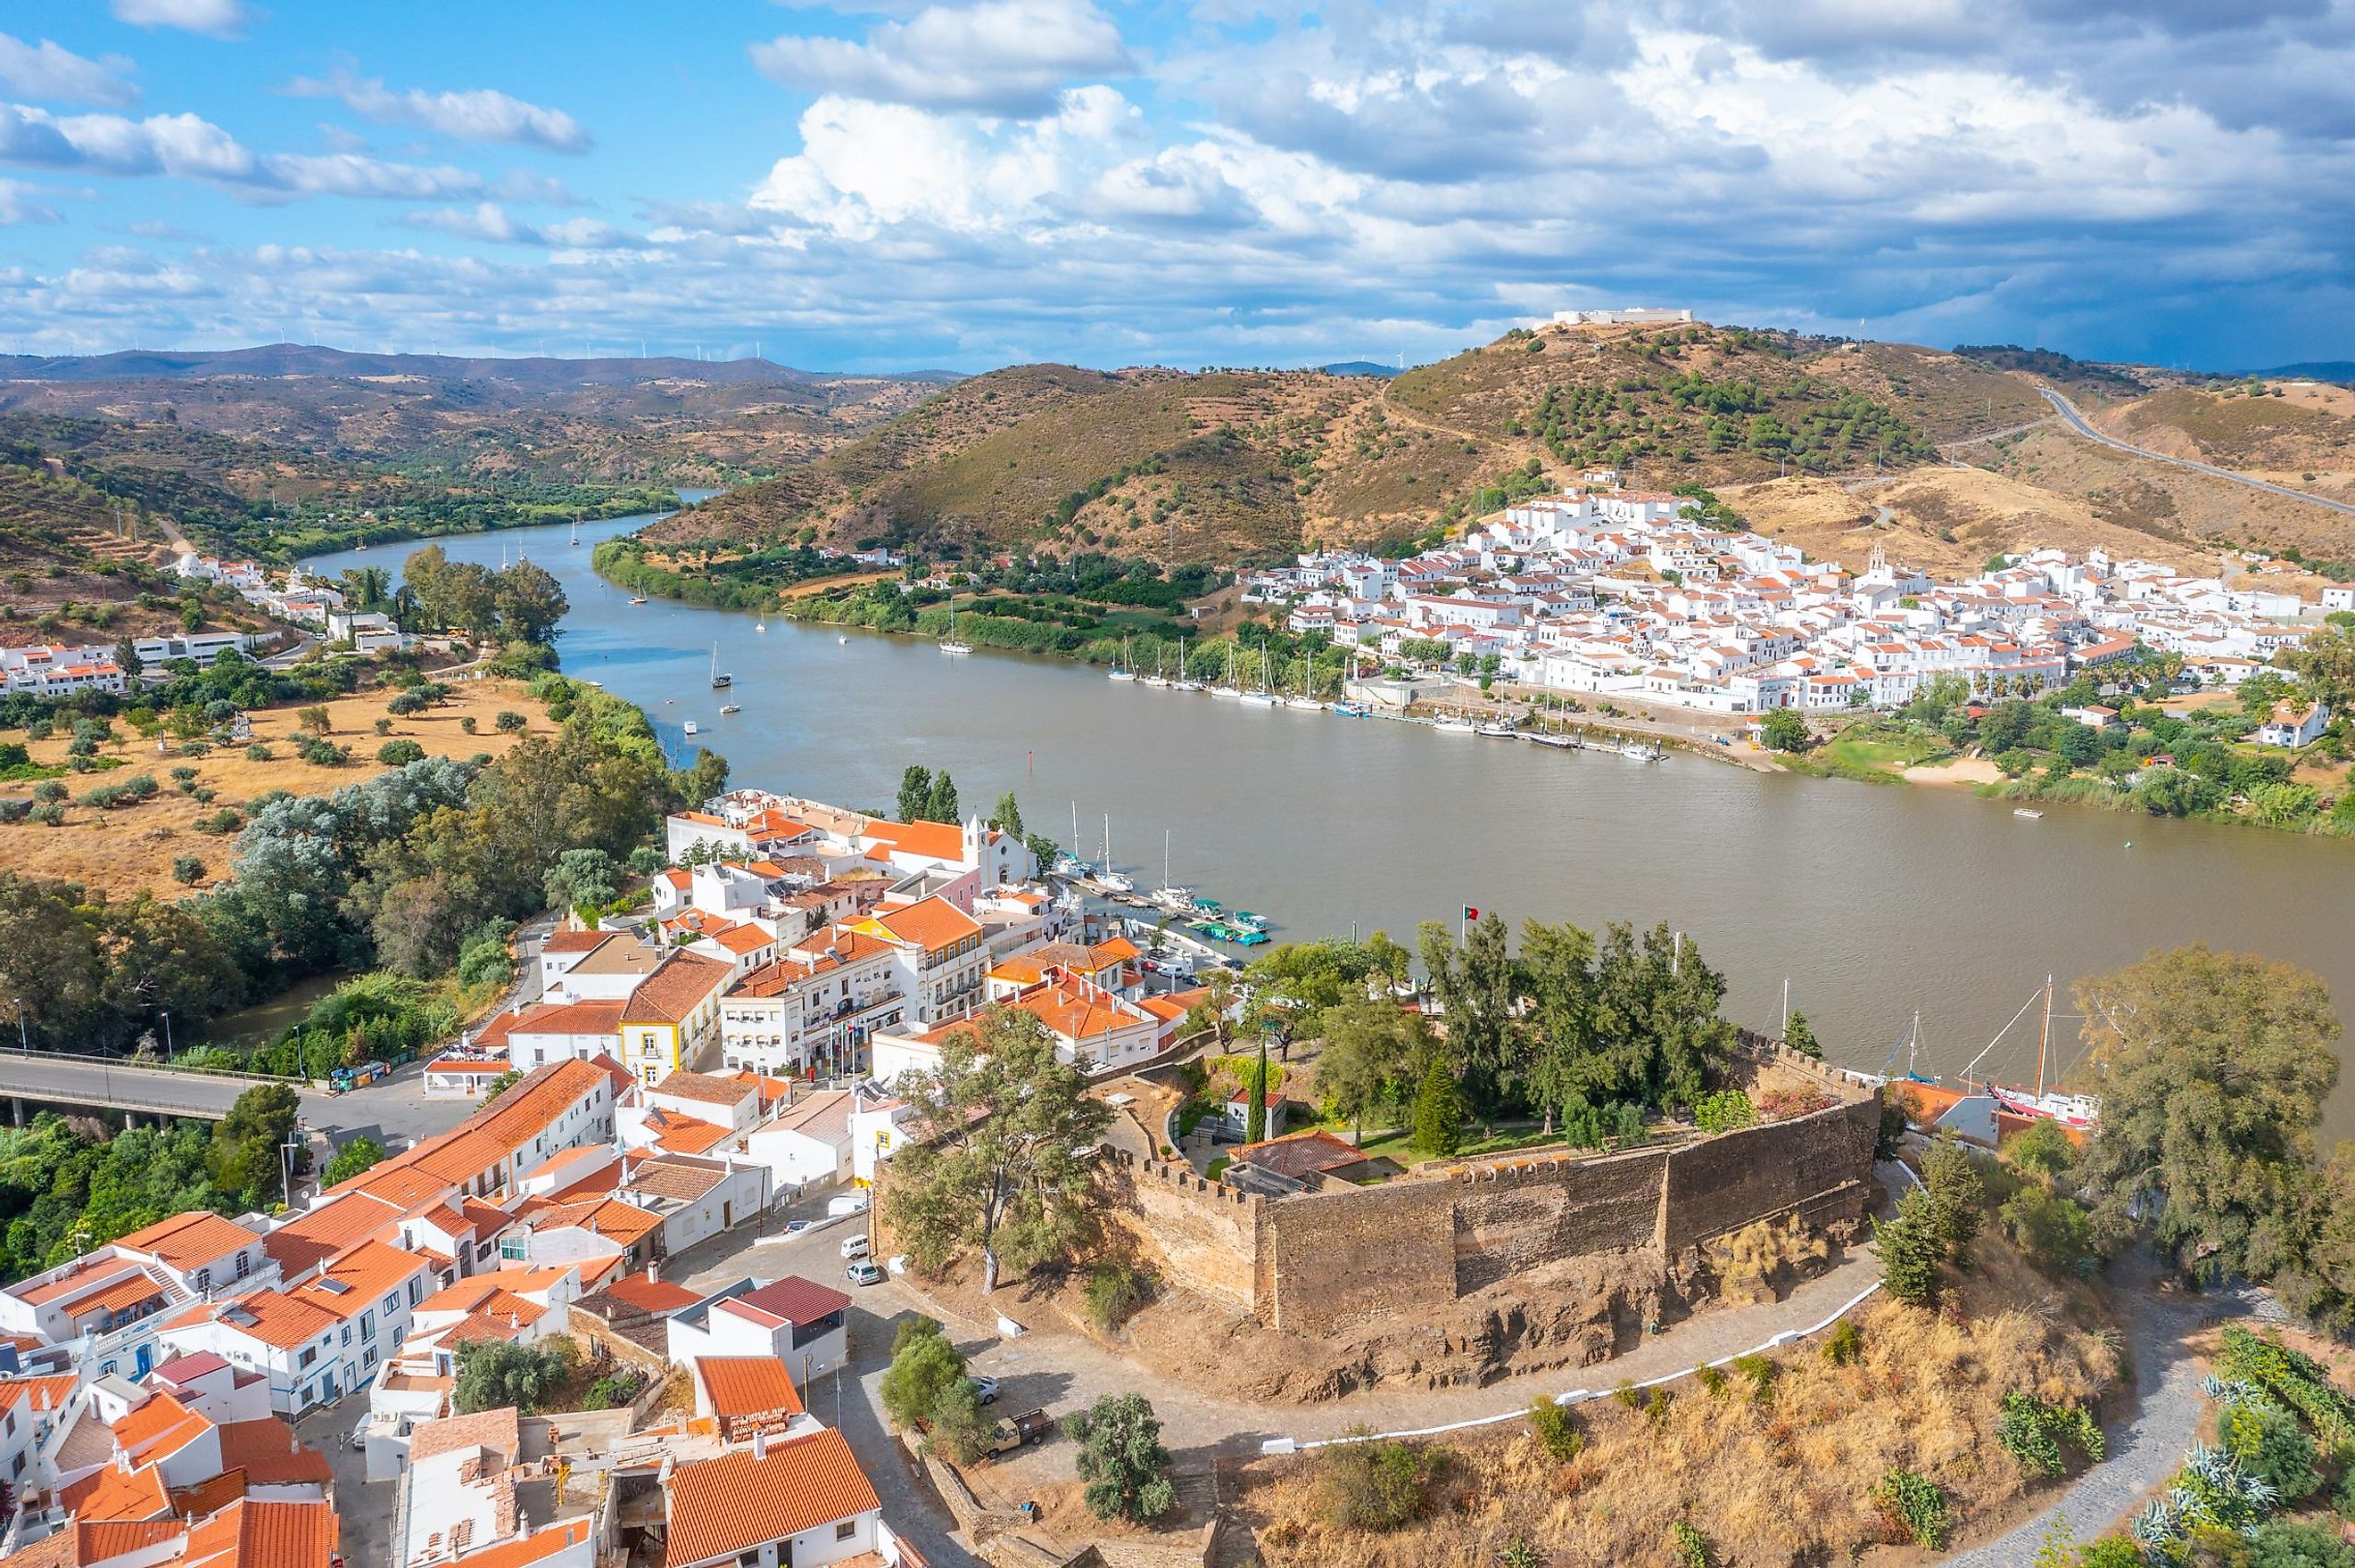 The Guadiana River flowing through Spain.